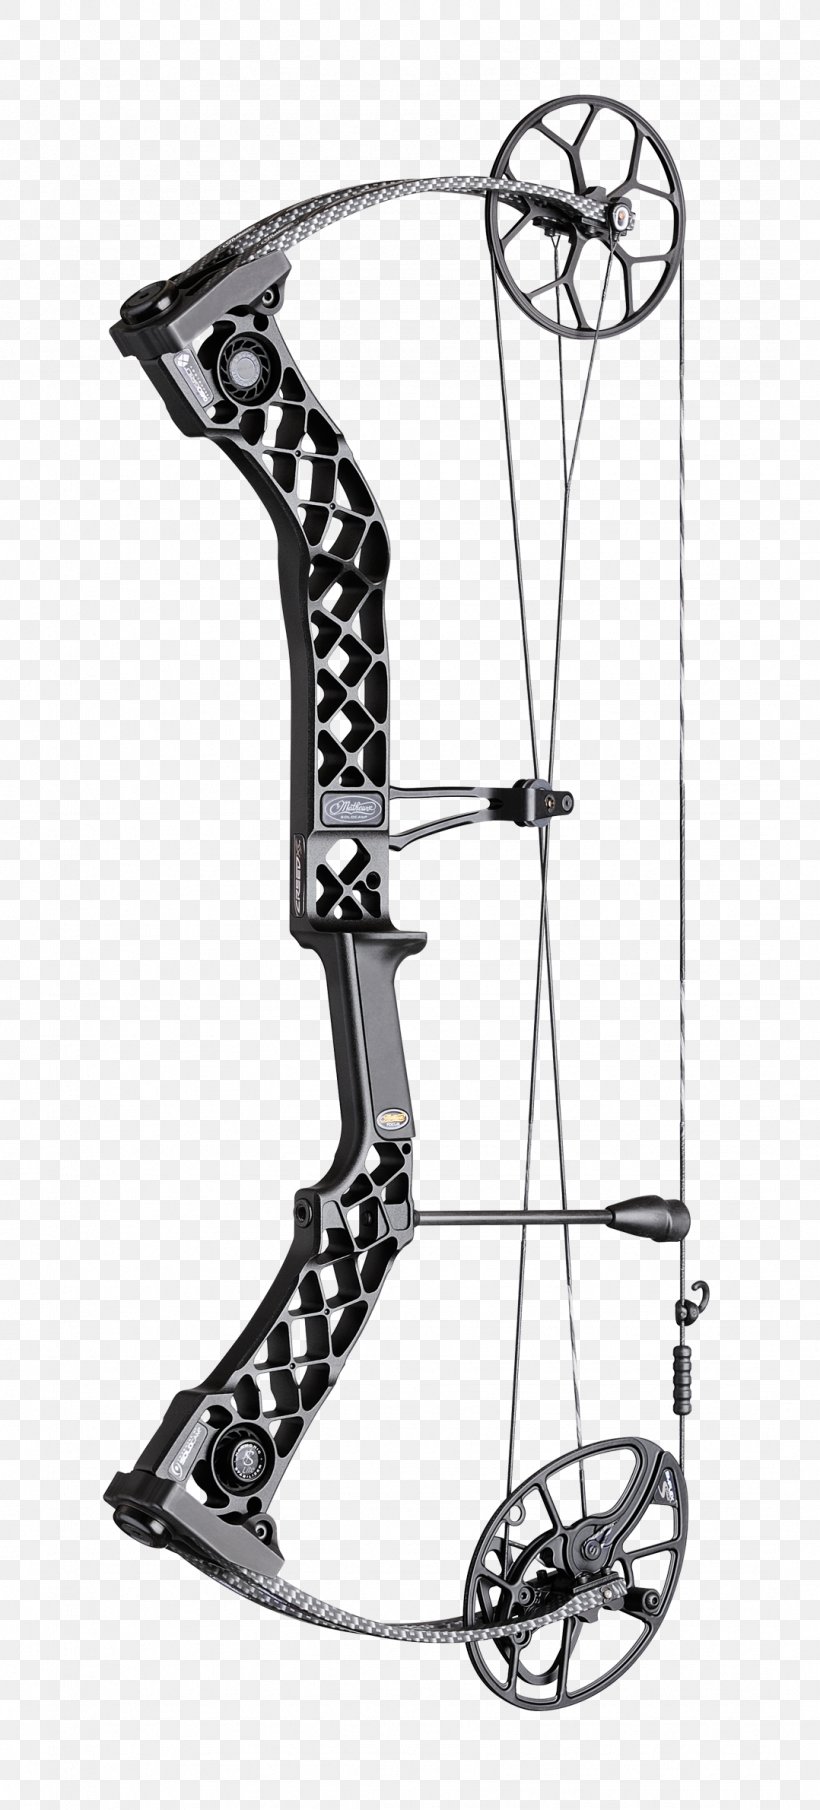 Bow And Arrow Compound Bows Archery Bowhunting, PNG, 1078x2380px, Bow And Arrow, Aim Archery Limited, Archery, Black, Black And White Download Free